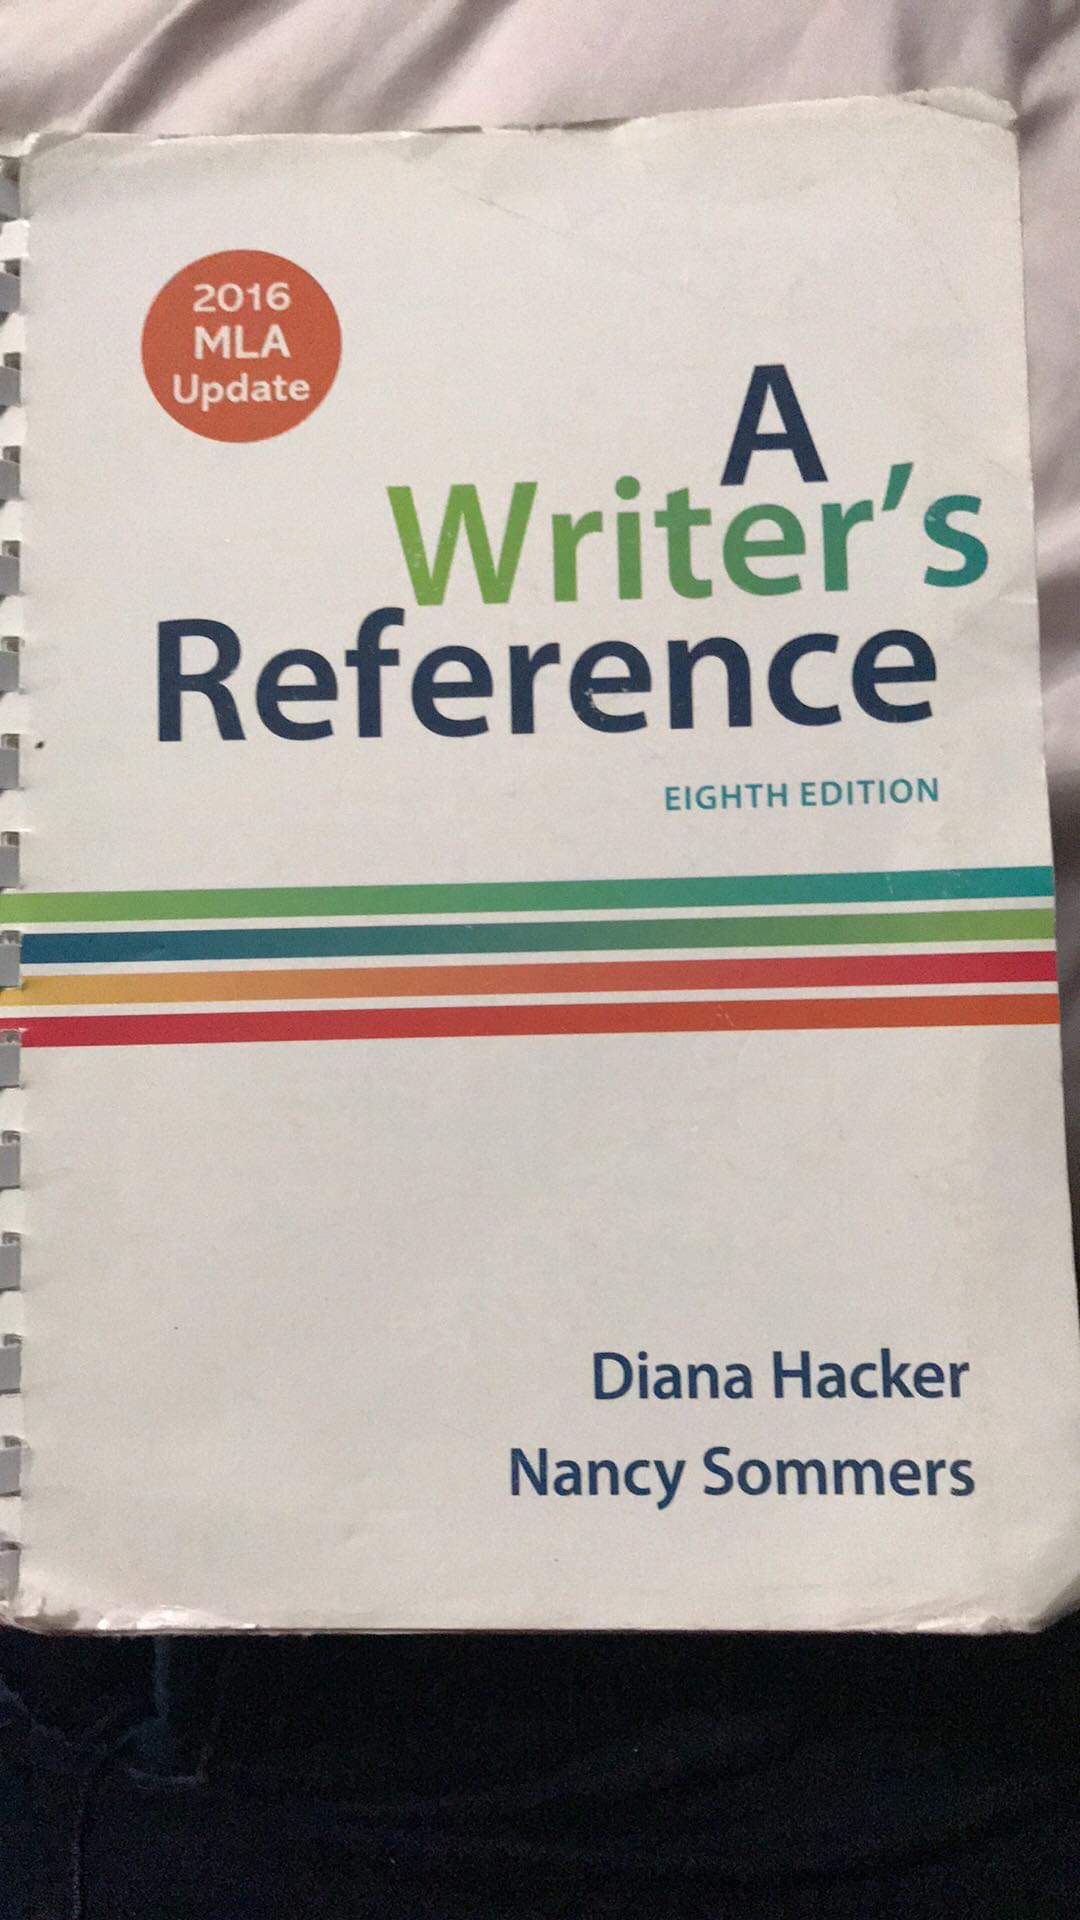 A Writer’s Reference Book